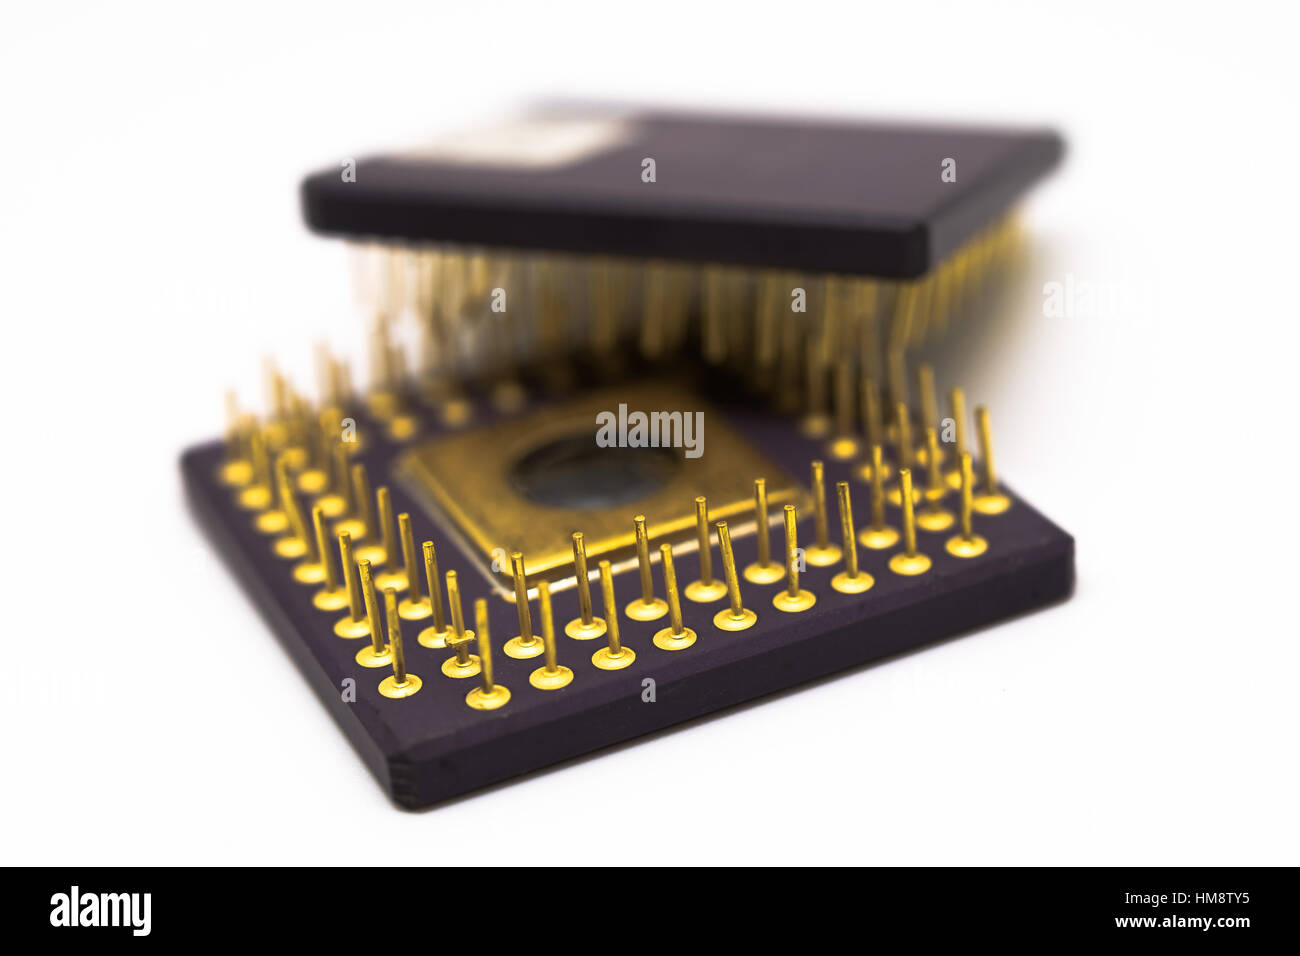 Semiconductor with gold plated pins on a white background. Stock Photo